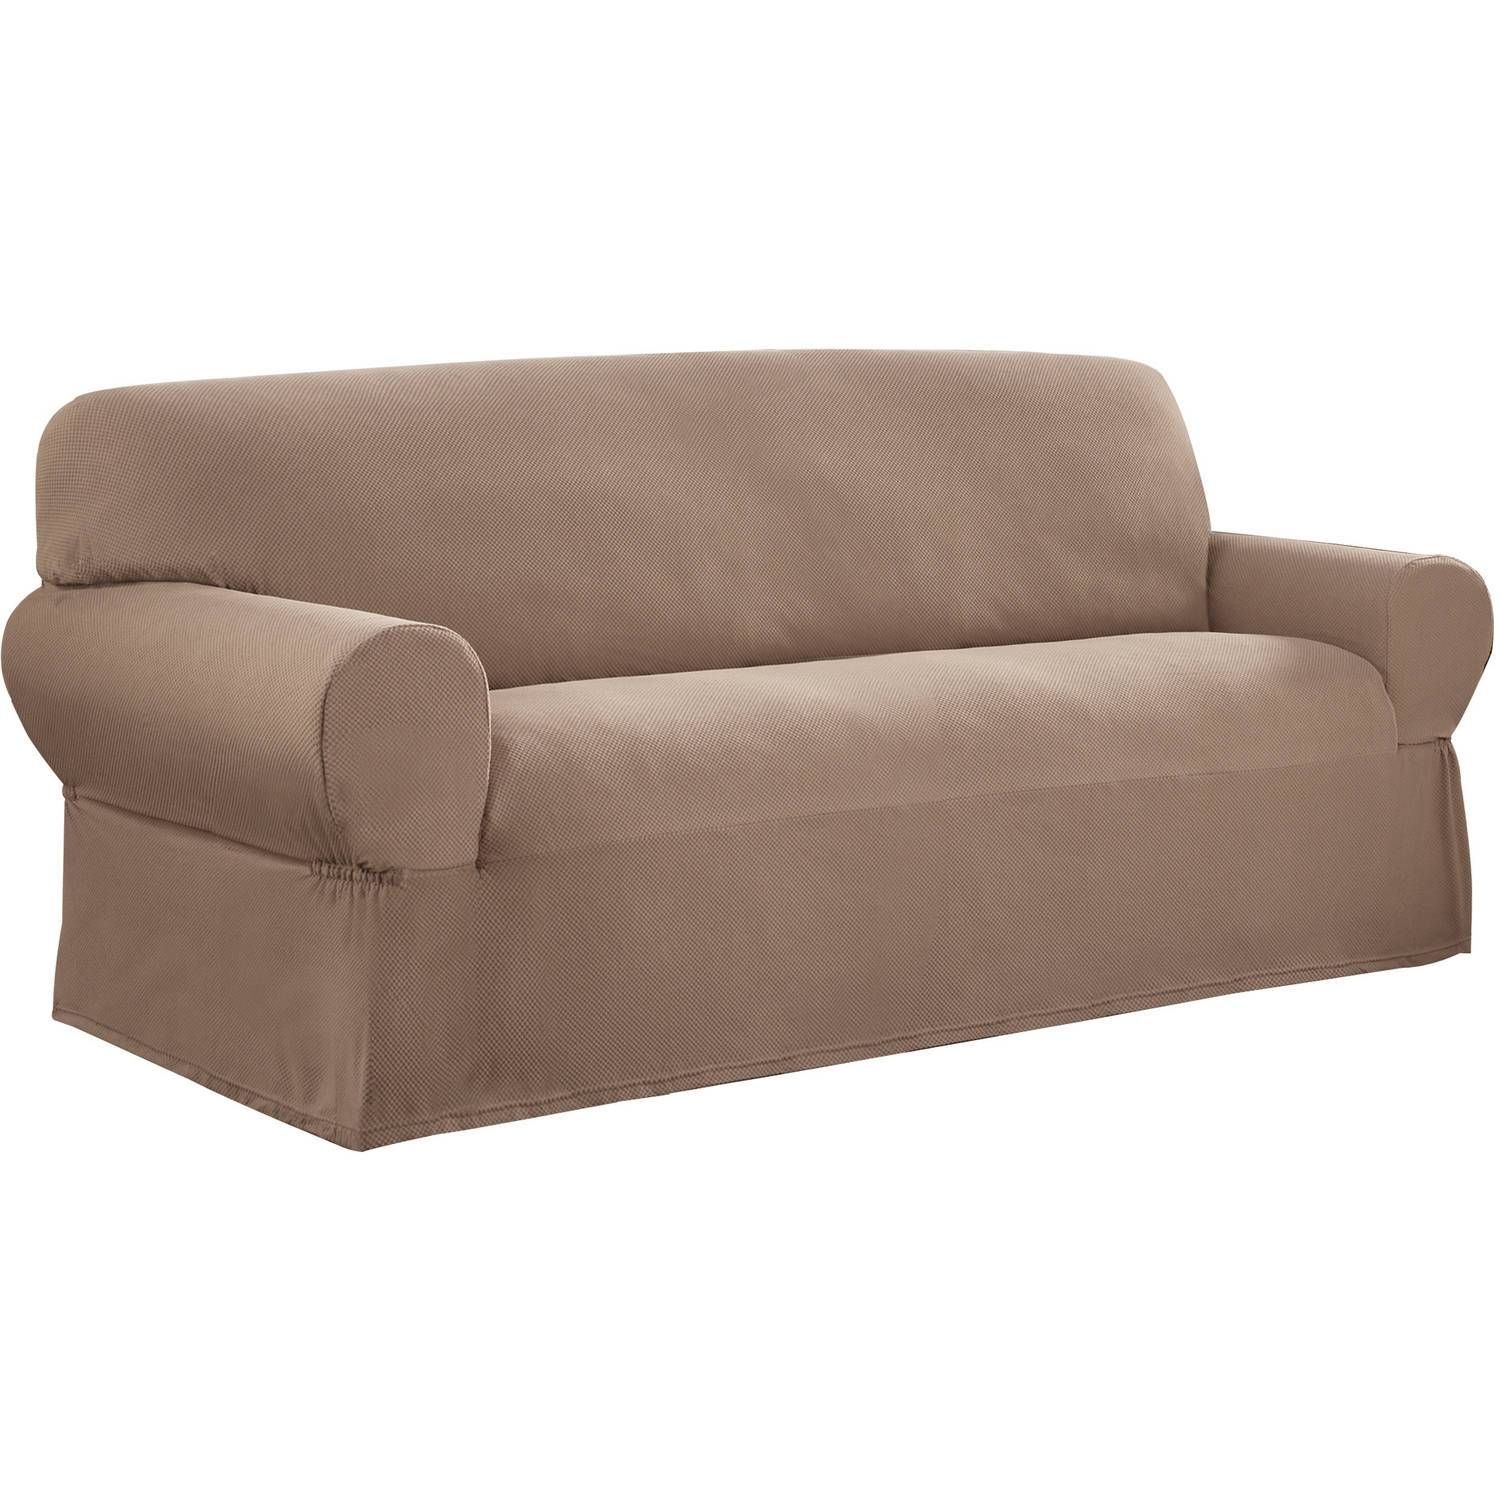 Mainstays 1 Piece Stretch Fabric Sofa Slipcover – Walmart Intended For Clearance Sofa Covers (View 12 of 30)